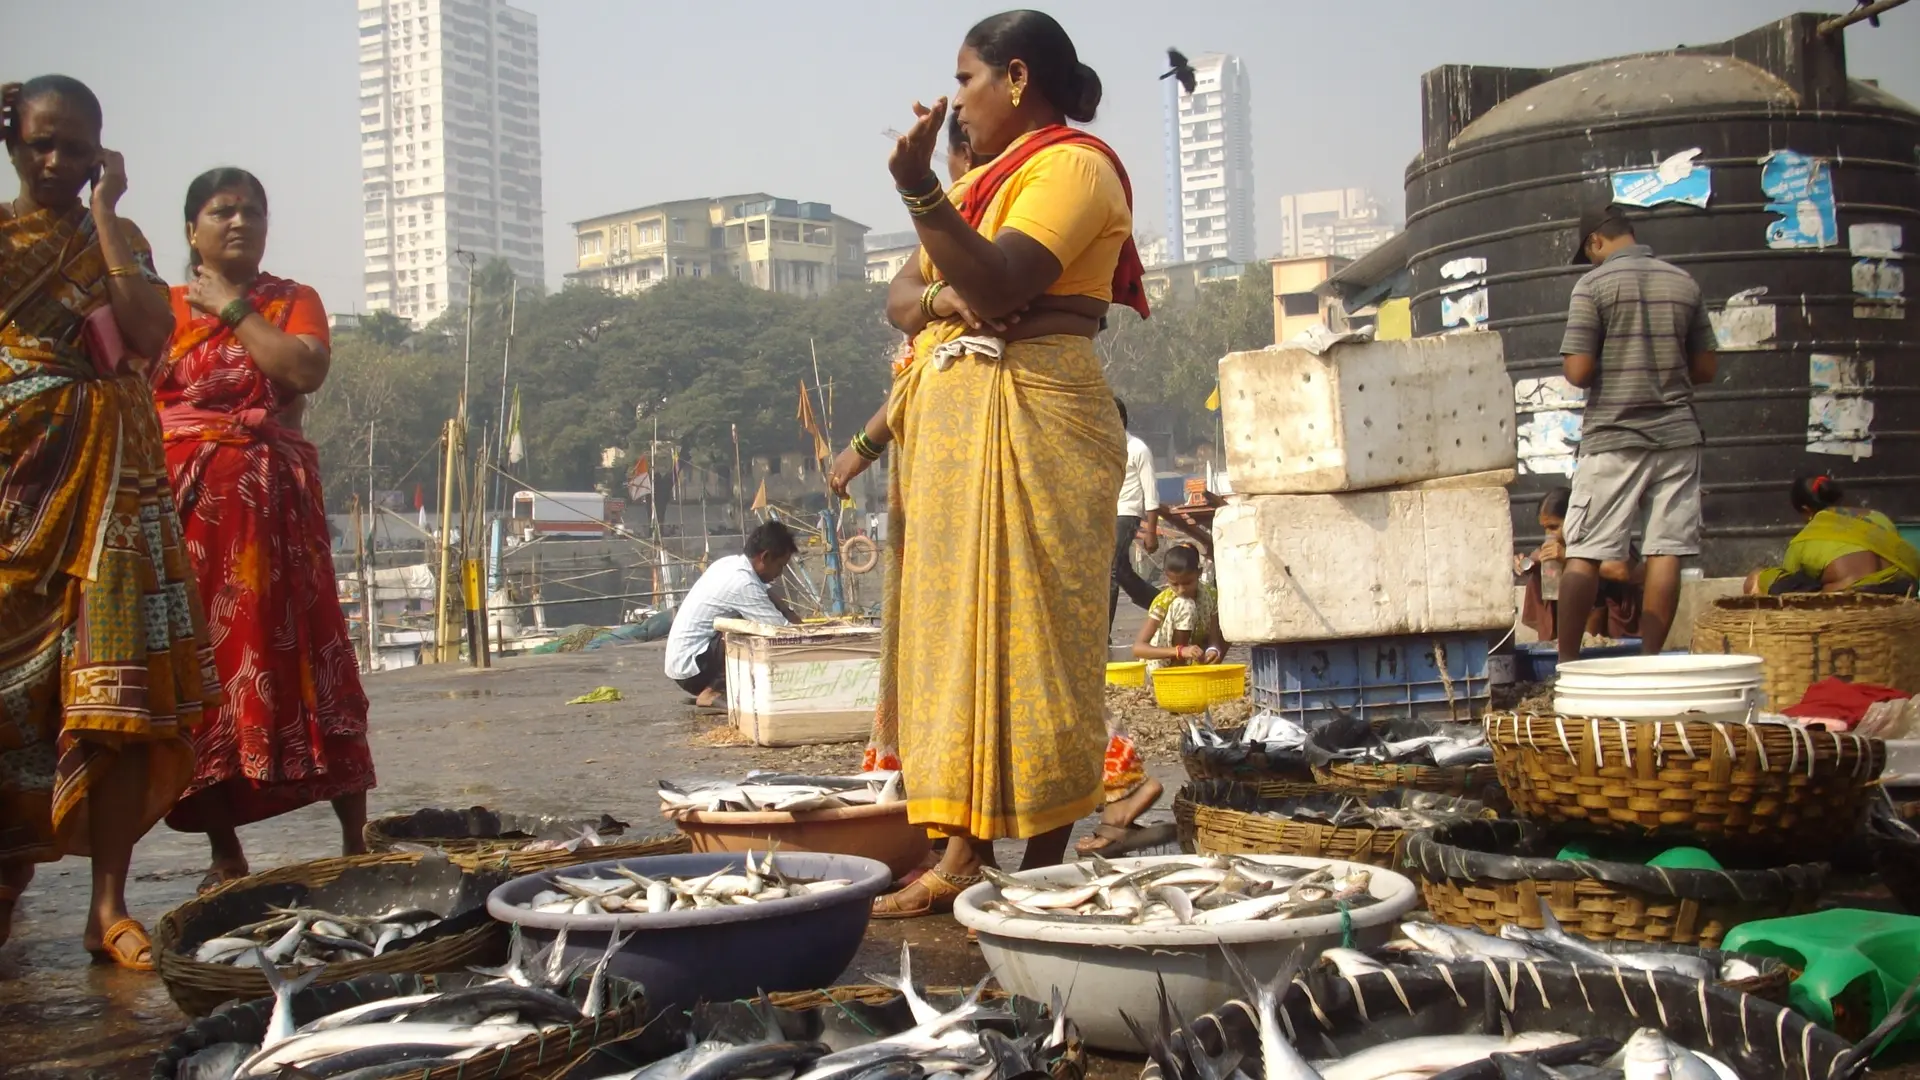 Baskets of fish and a woman in yellow standing besides at The Seasons Dock in Mumbai.